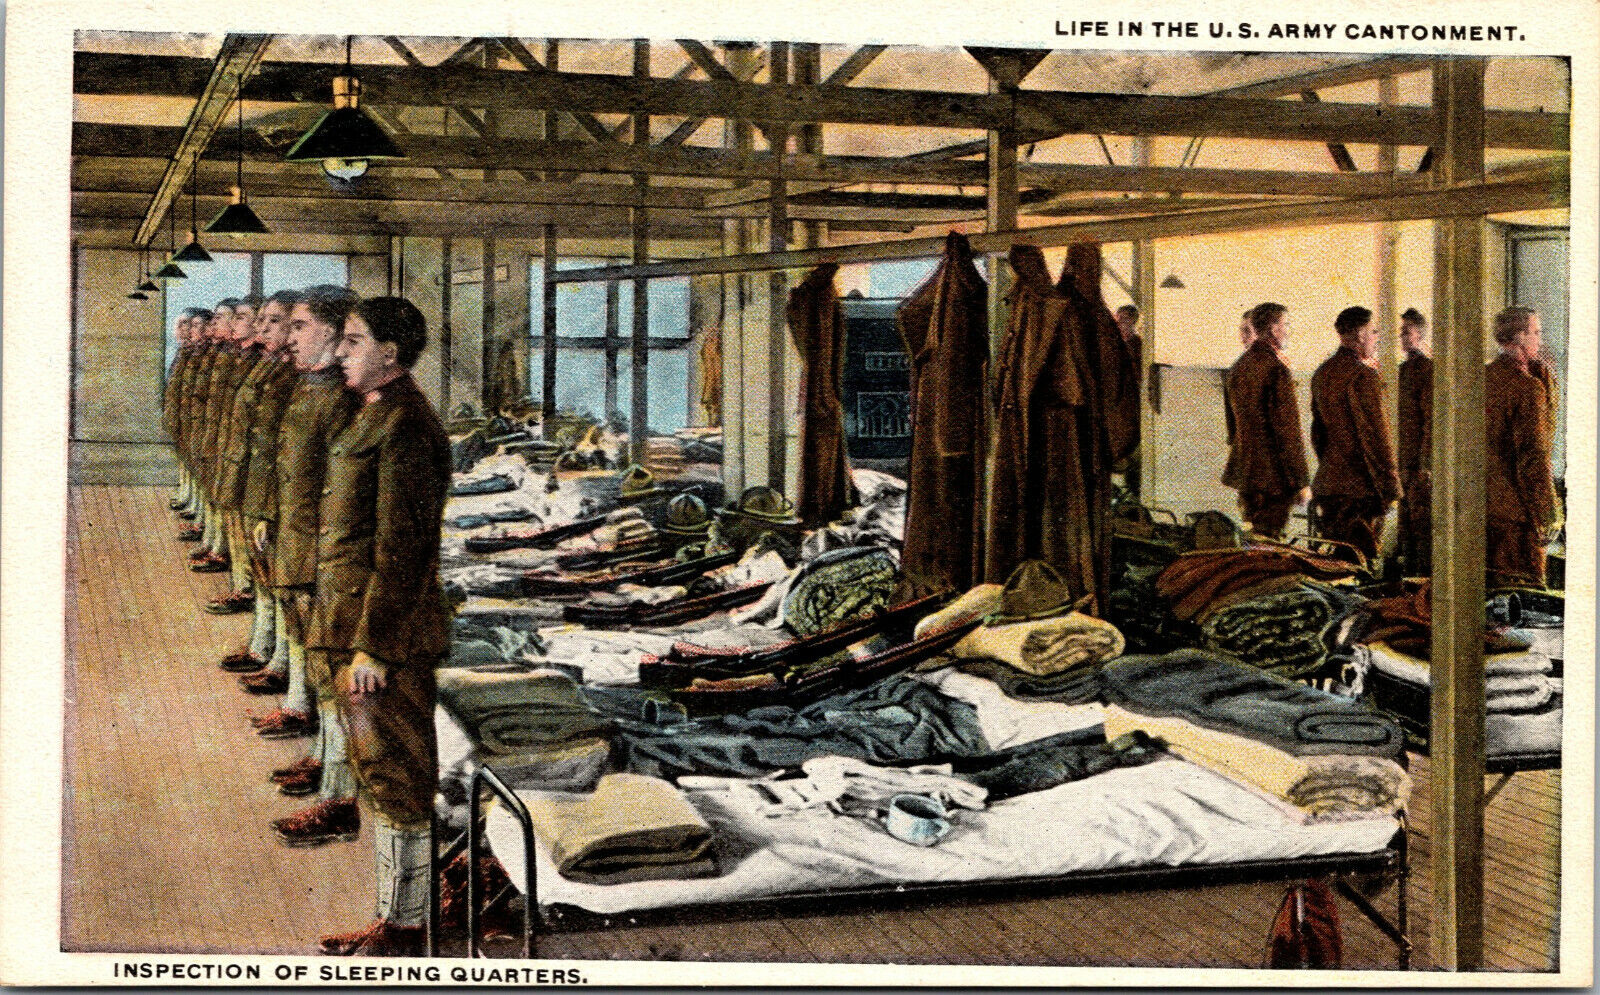 Vtg Life in US Army Cantonment Inspection of Sleeping Quarters Military Postcard